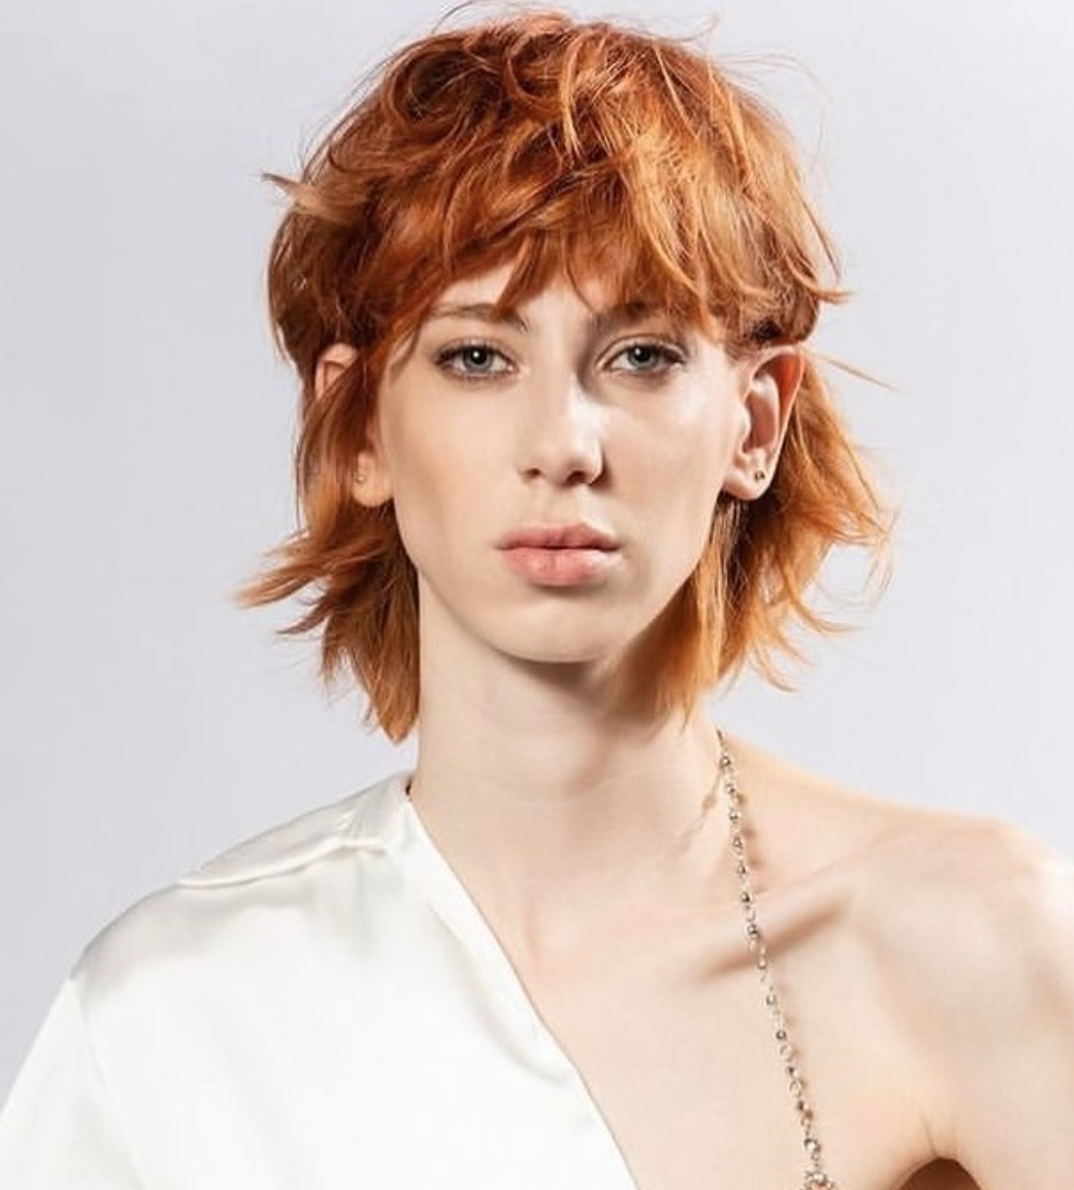 A thin woman with a short haircut on her red hair.